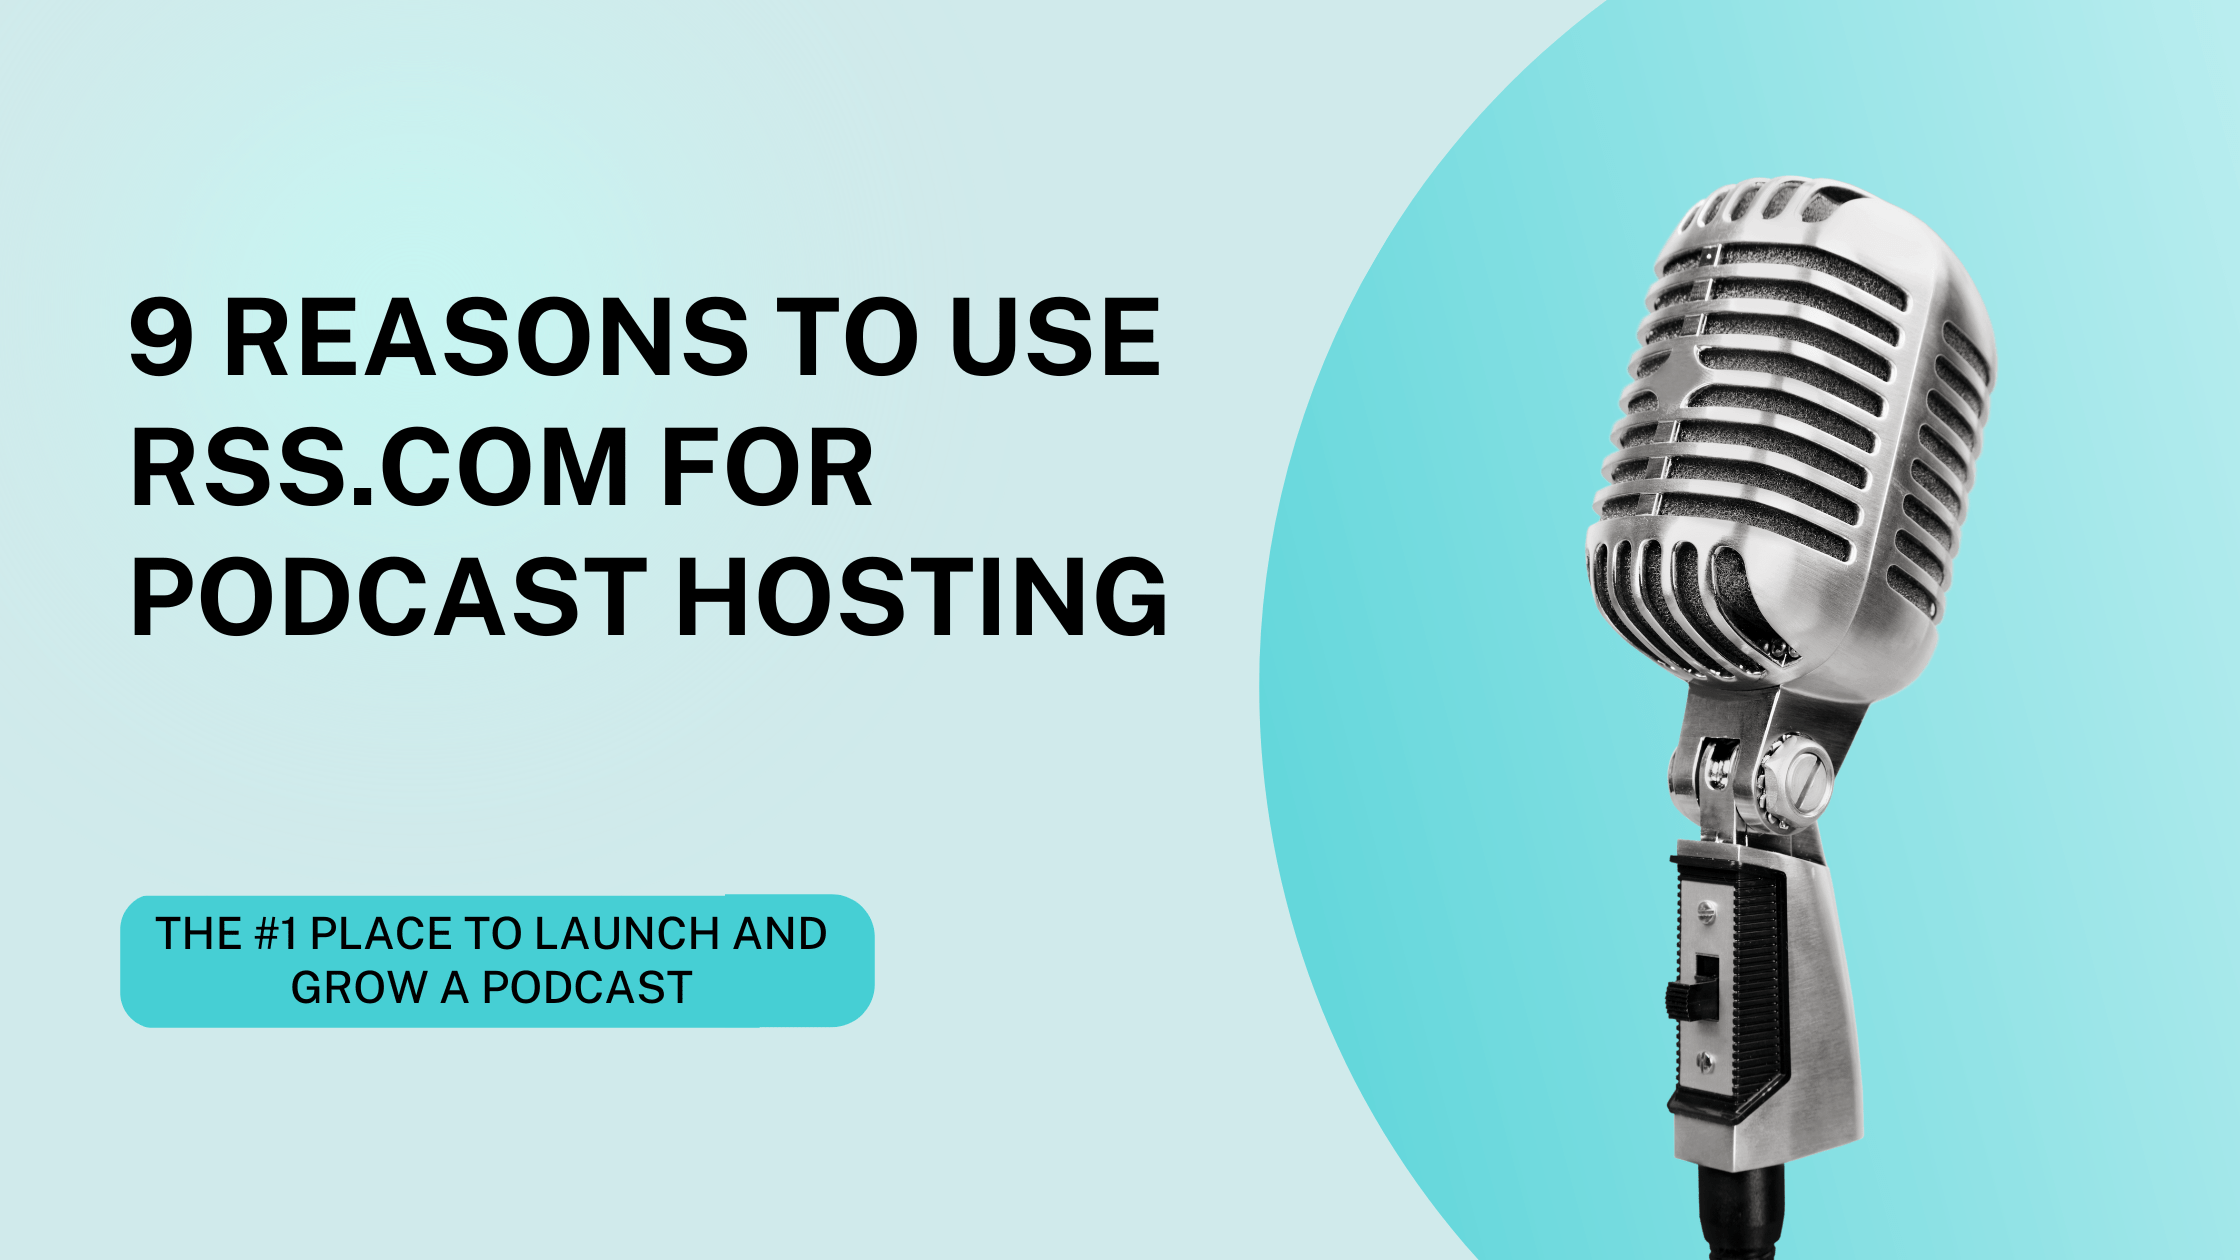 9 Reasons to Use RSS.com for Podcast Hosting Header